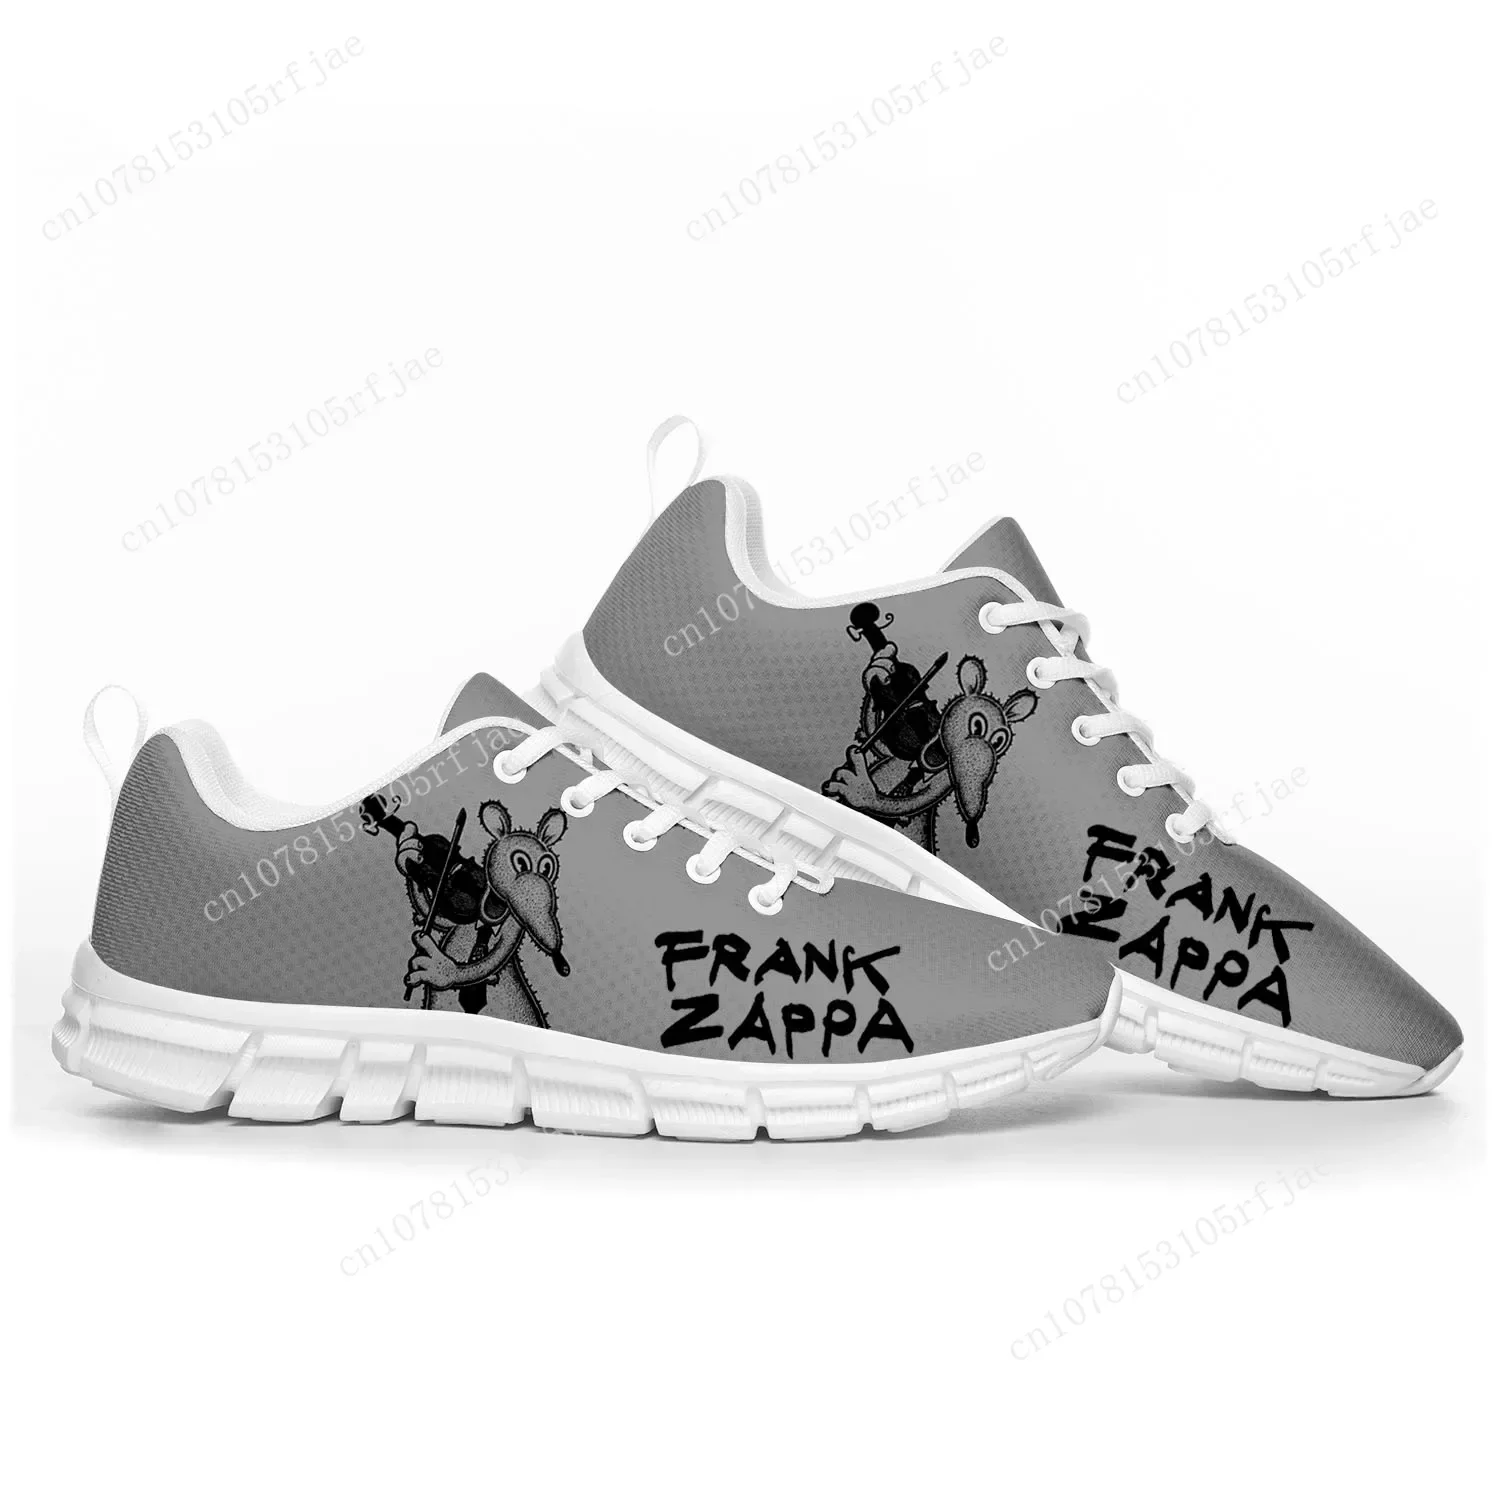 

Frank Zappa Rock Musician Sports Shoes Mens Womens Teenager Kids Children Sneakers Casual Custom High Quality Couple Shoes White